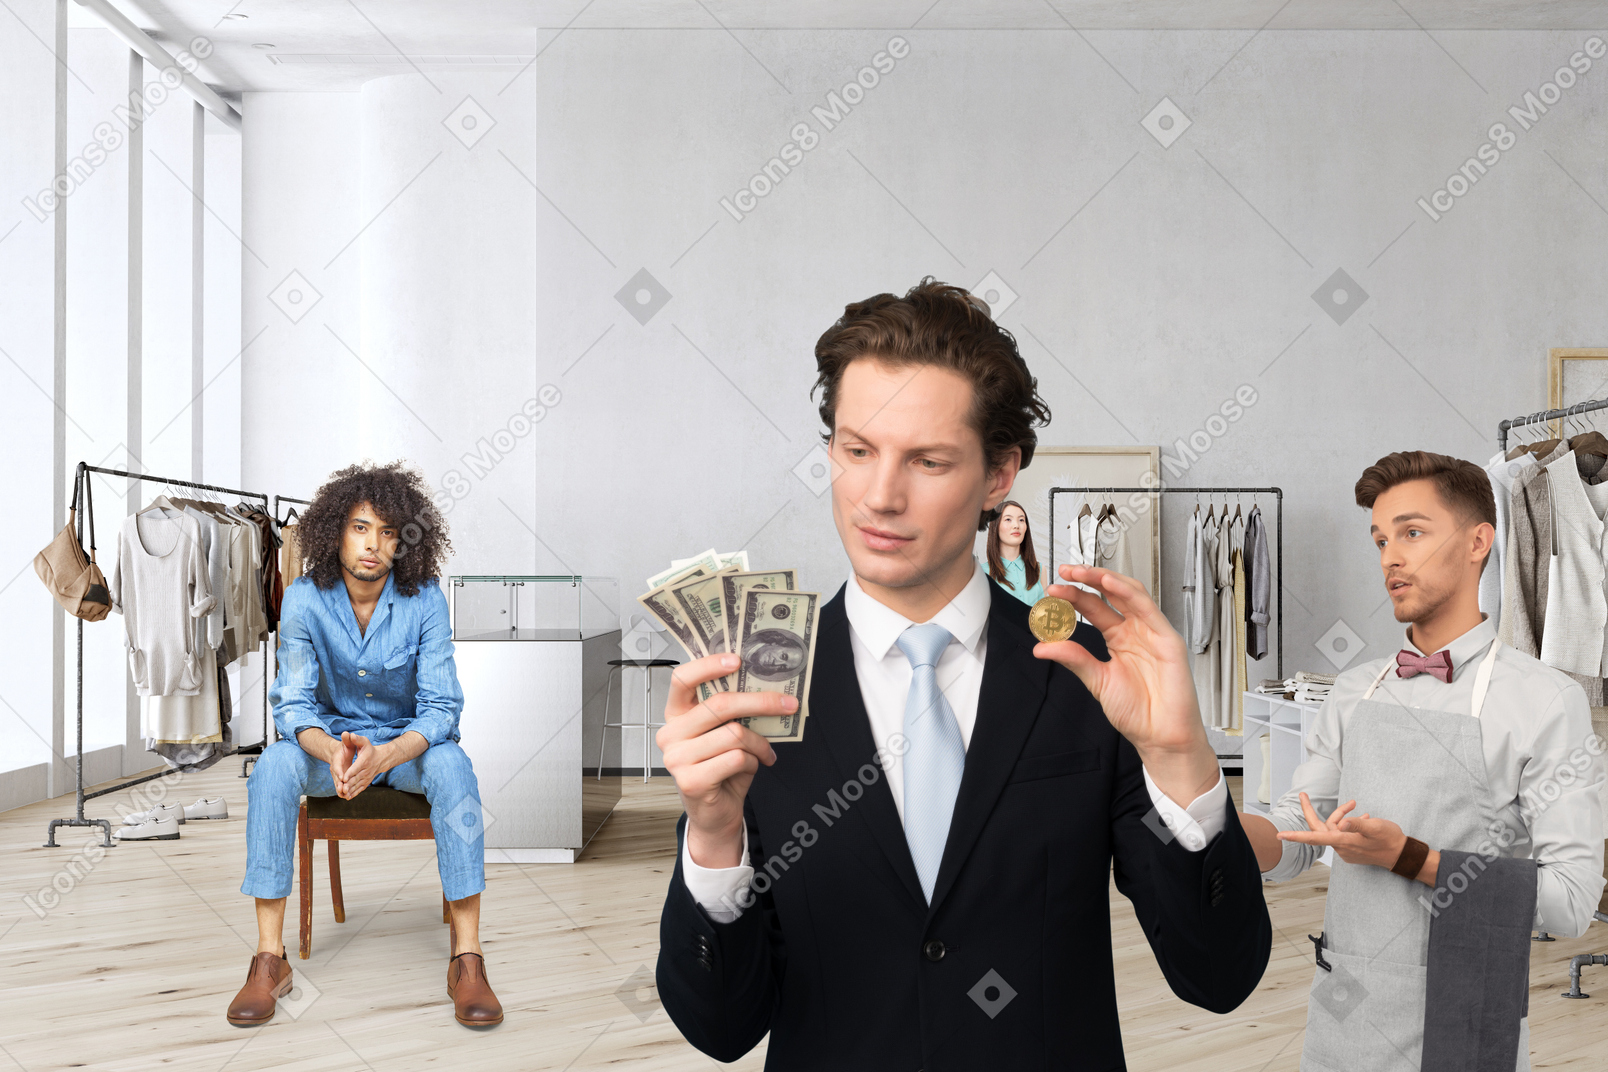 A man in a suit holding money in a clothing store